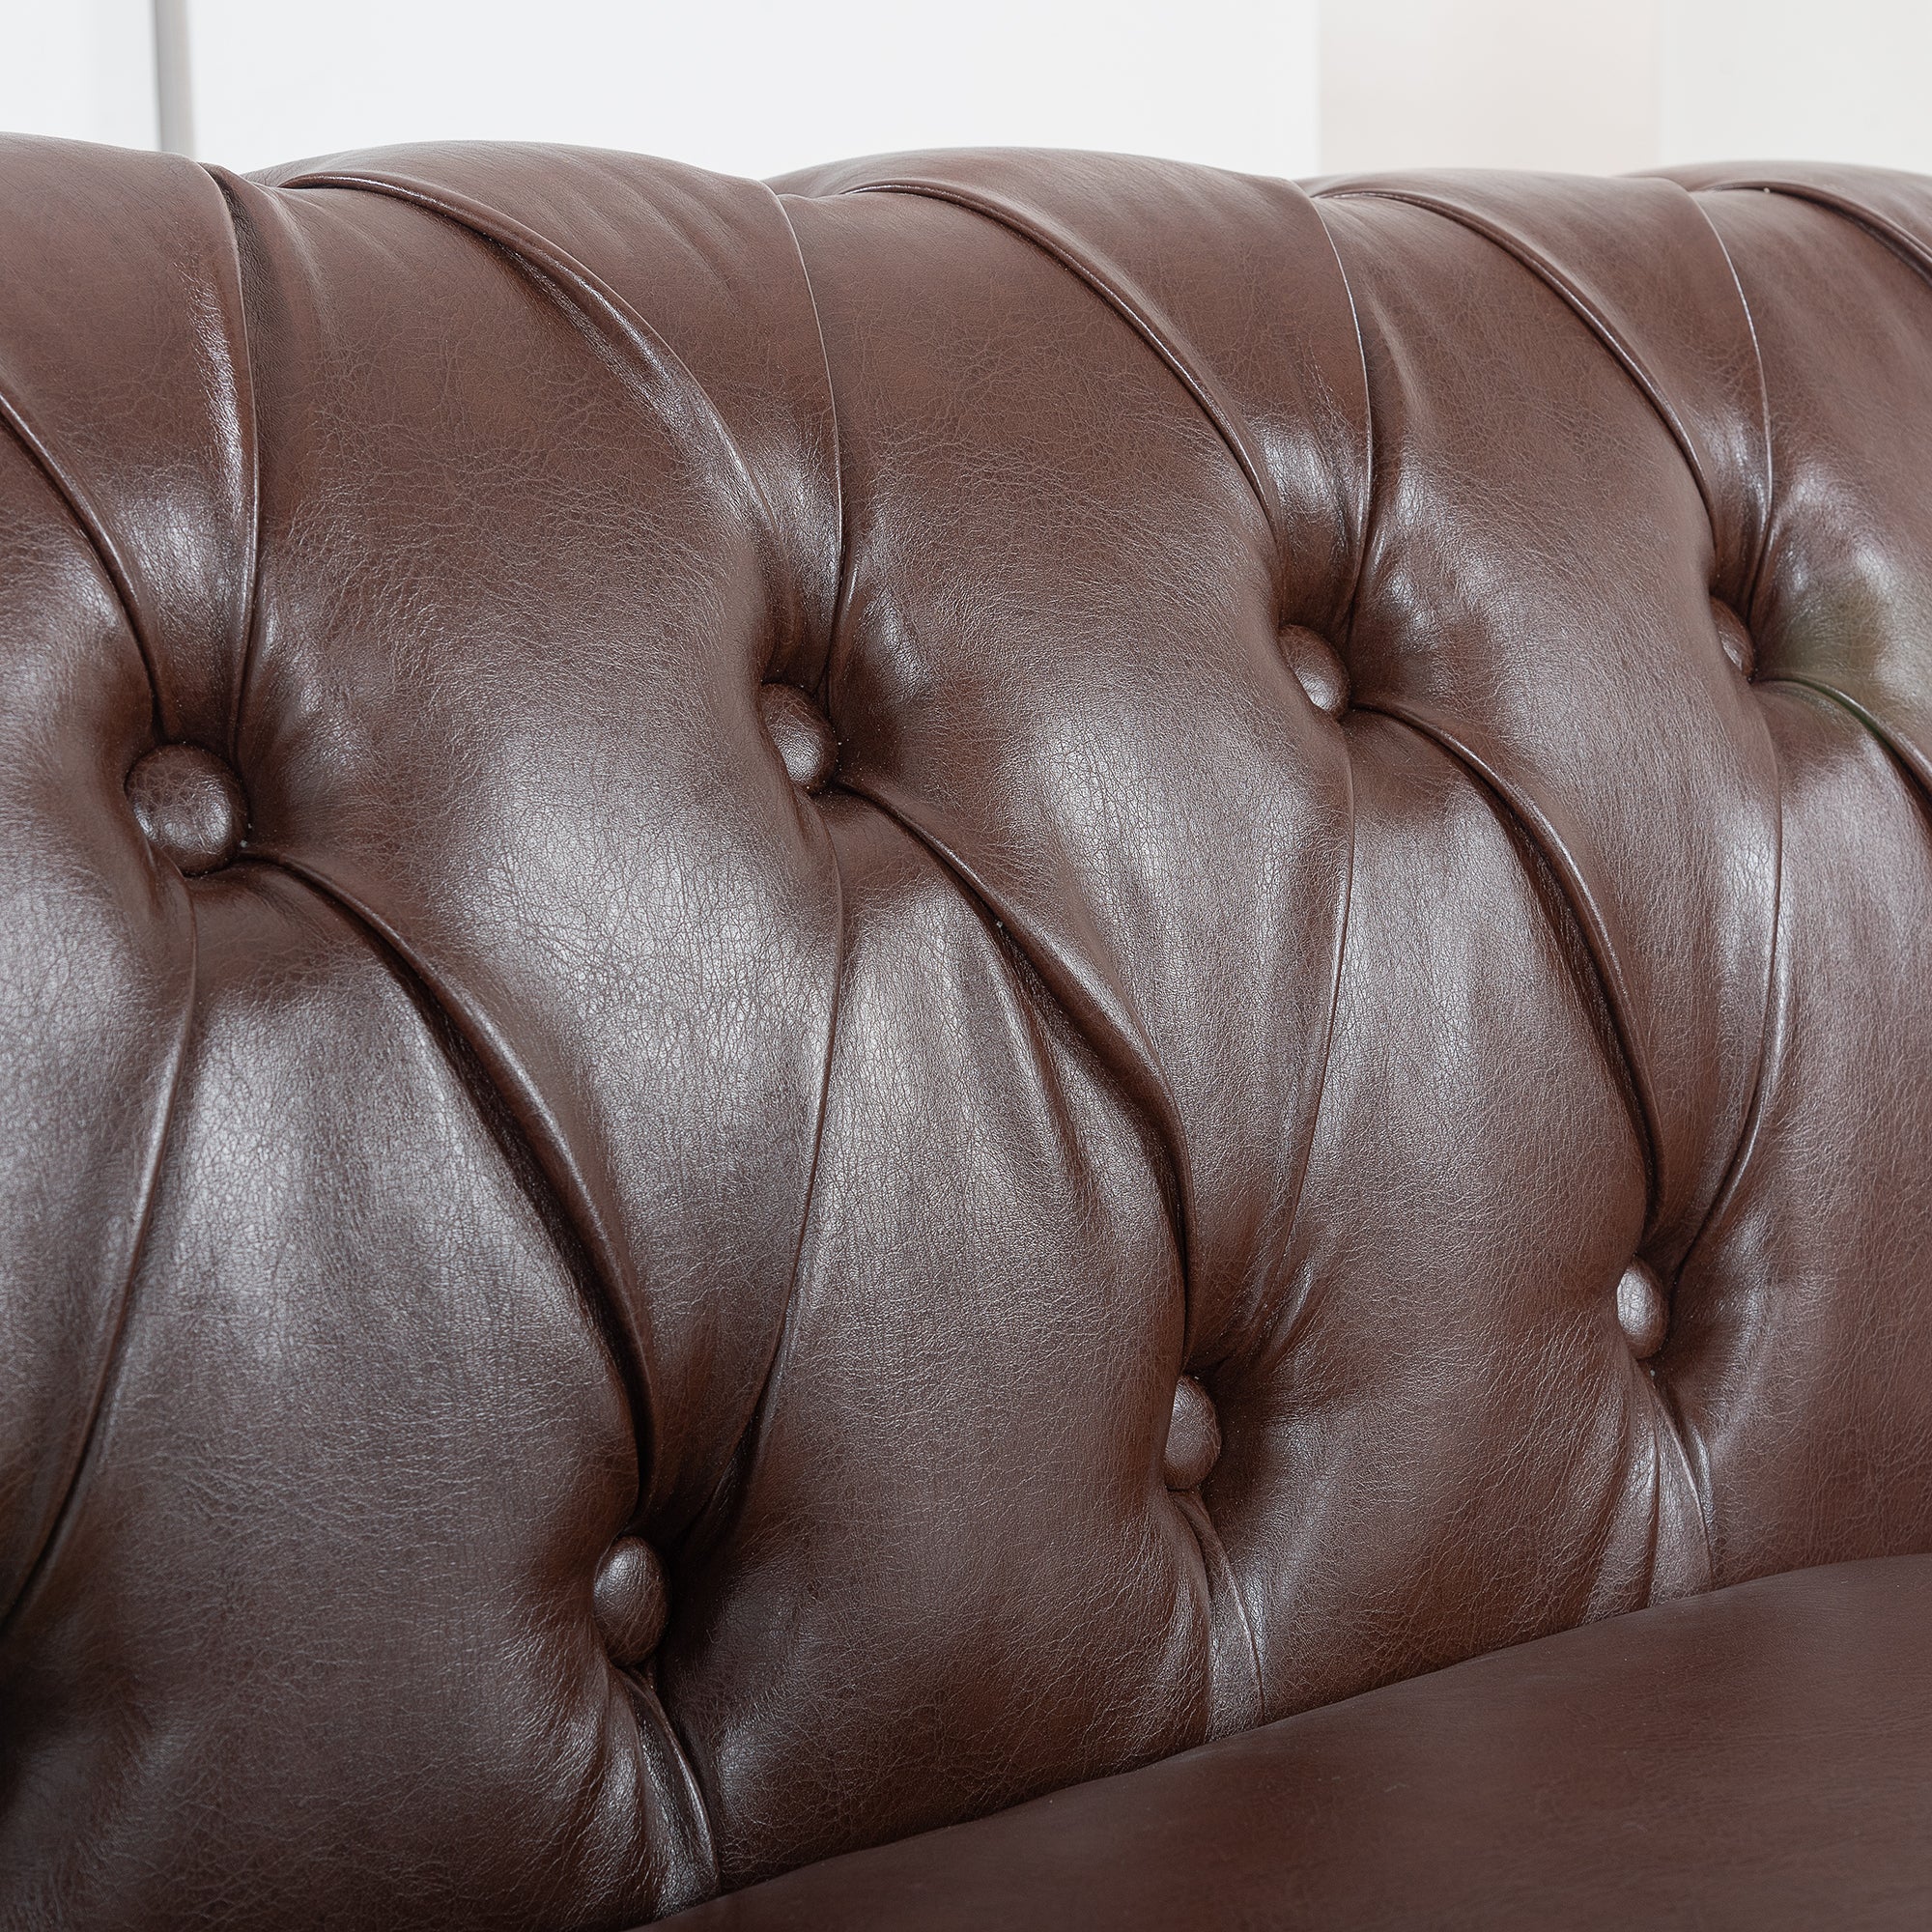 84" Dark Brown Faux Leather Chesterfield Sofa With Nailhead Trim